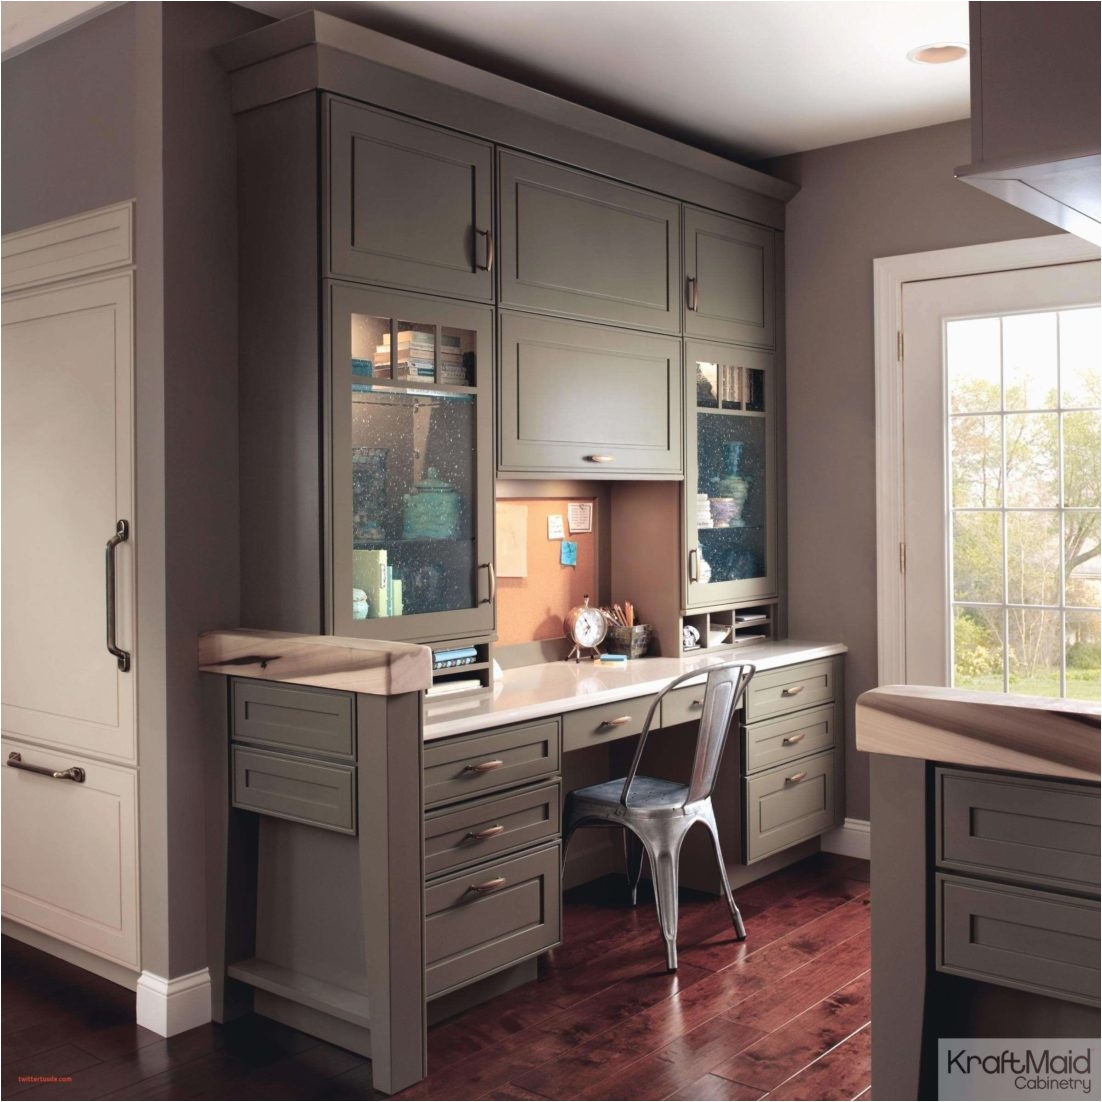 Kitchen Cabinet Colors Oak Kitchen Cabinets Pickled Maple Awesome Cabinet 0d Scheme Wooden